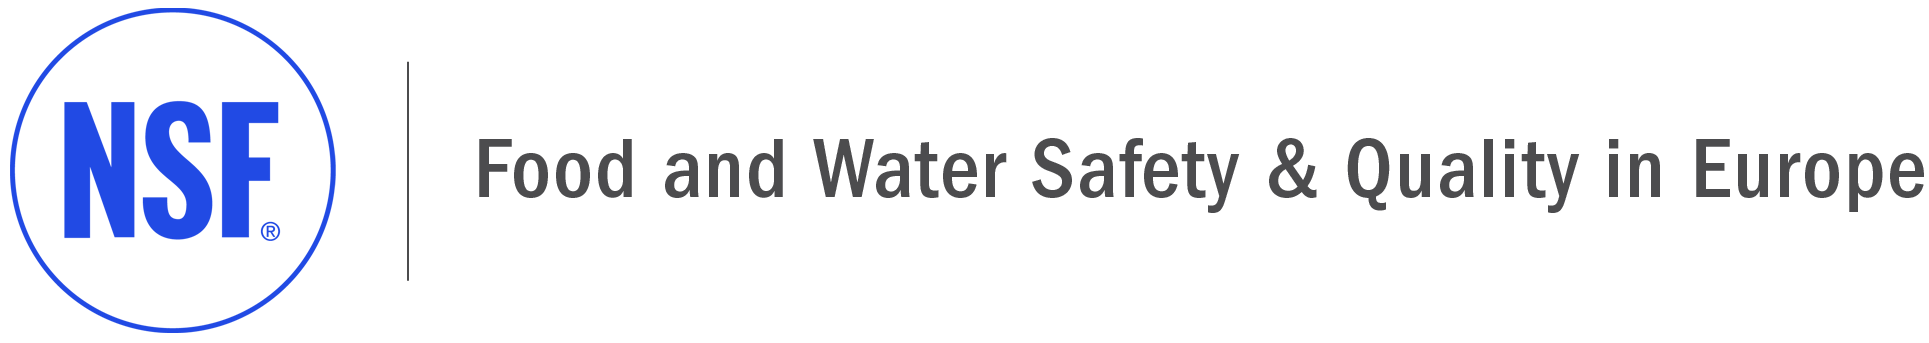 Food and Water Safety & Quality in Europe